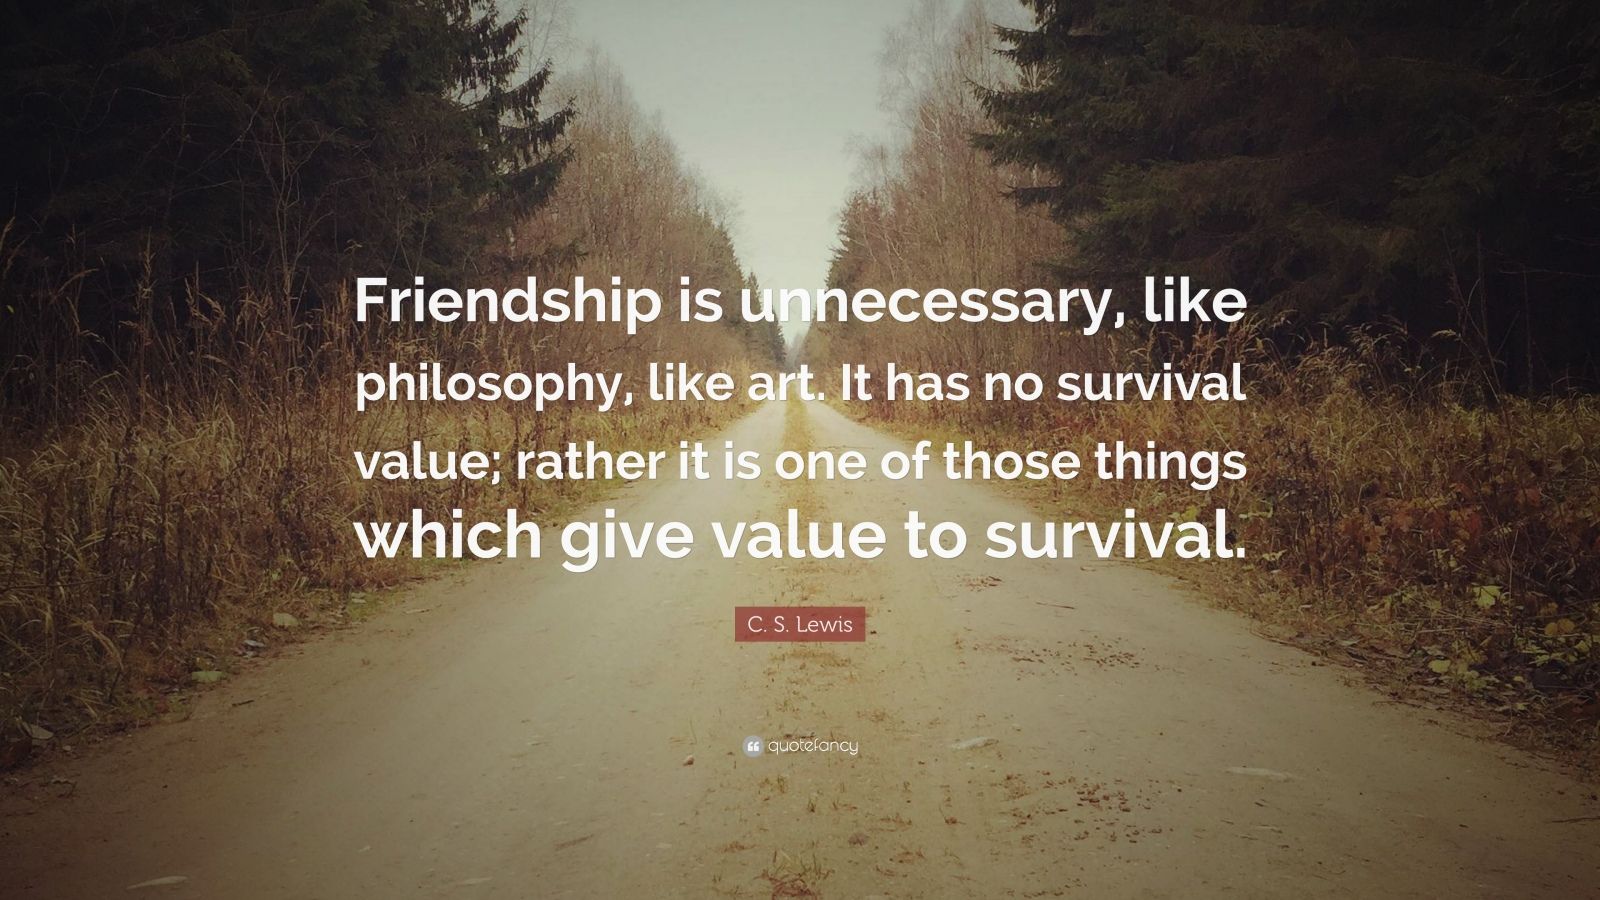 C. S. Lewis Quote: “Friendship is unnecessary, like philosophy, like